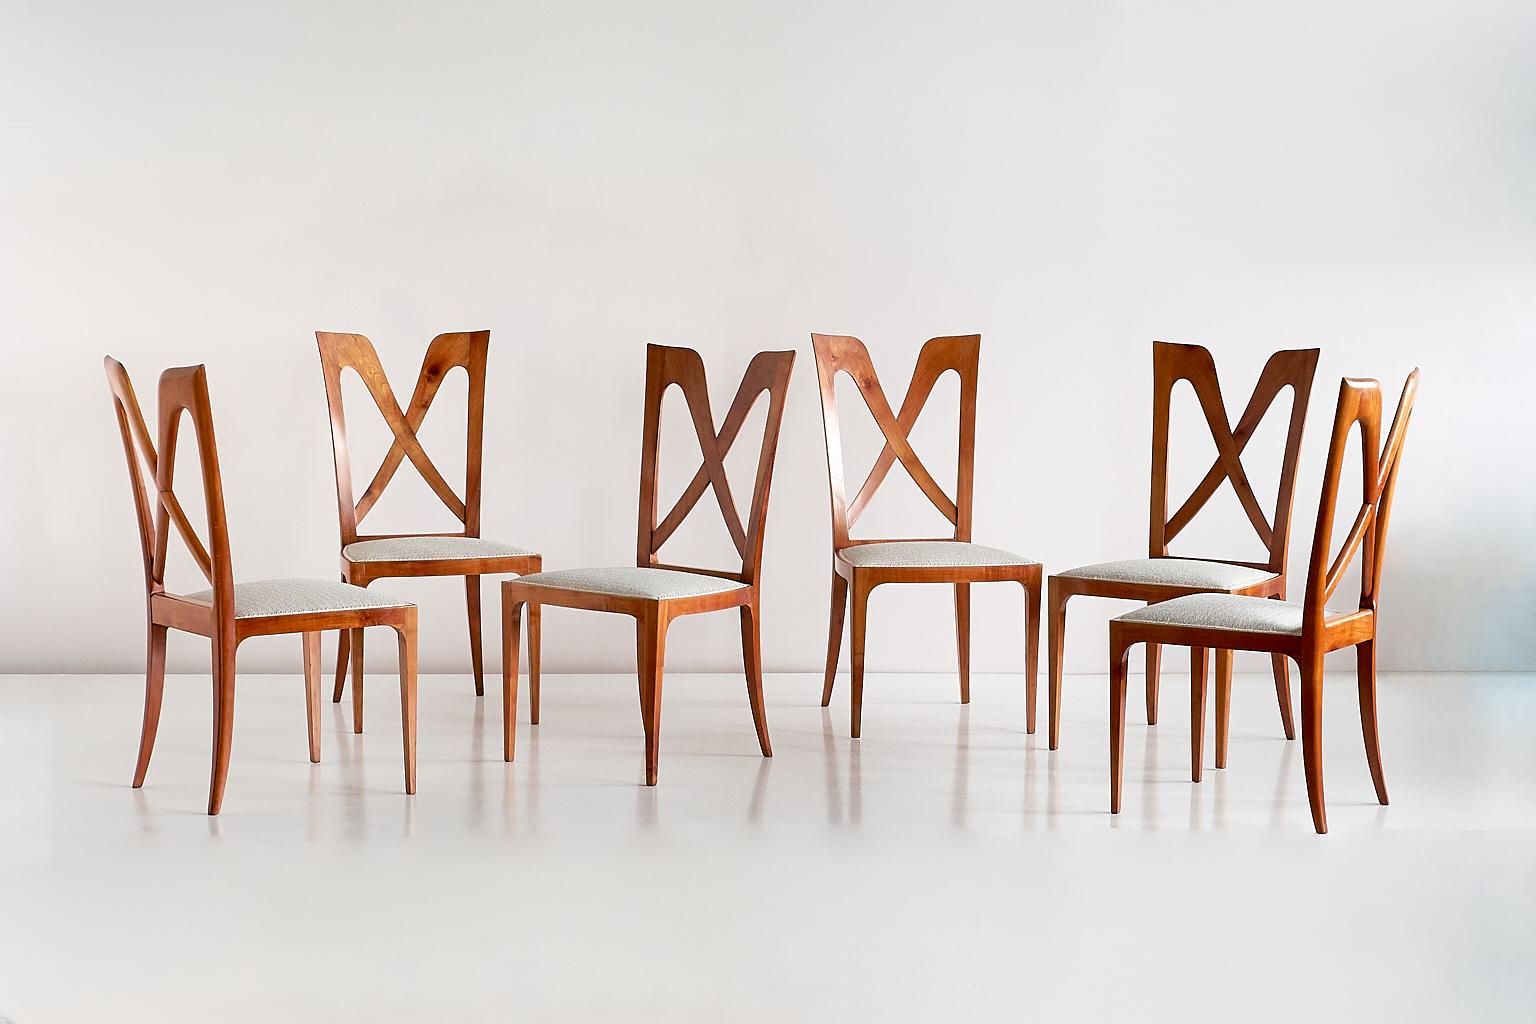 This exceptional set of dining chairs was designed by Don Ulderico Carlo Alberto Forni for a private residence in Milan. The design was produced by hand by a master carpenter in the Como area in the late 1940s. 
The frame of the chair is in solid